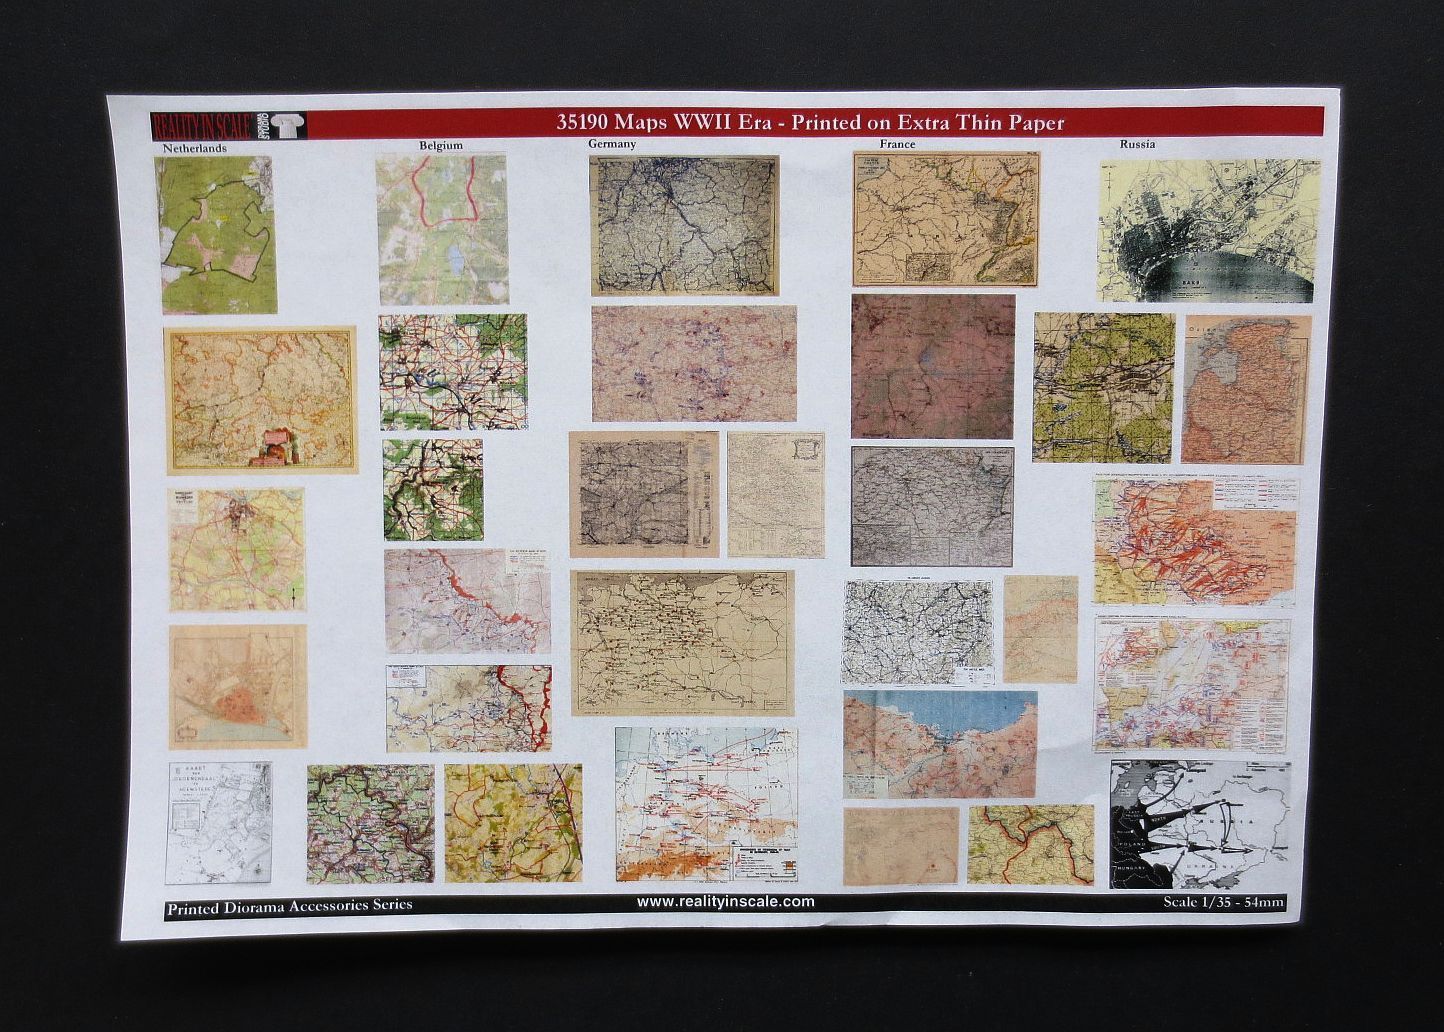 Maps WWII era - Printed on extra Thin Paper